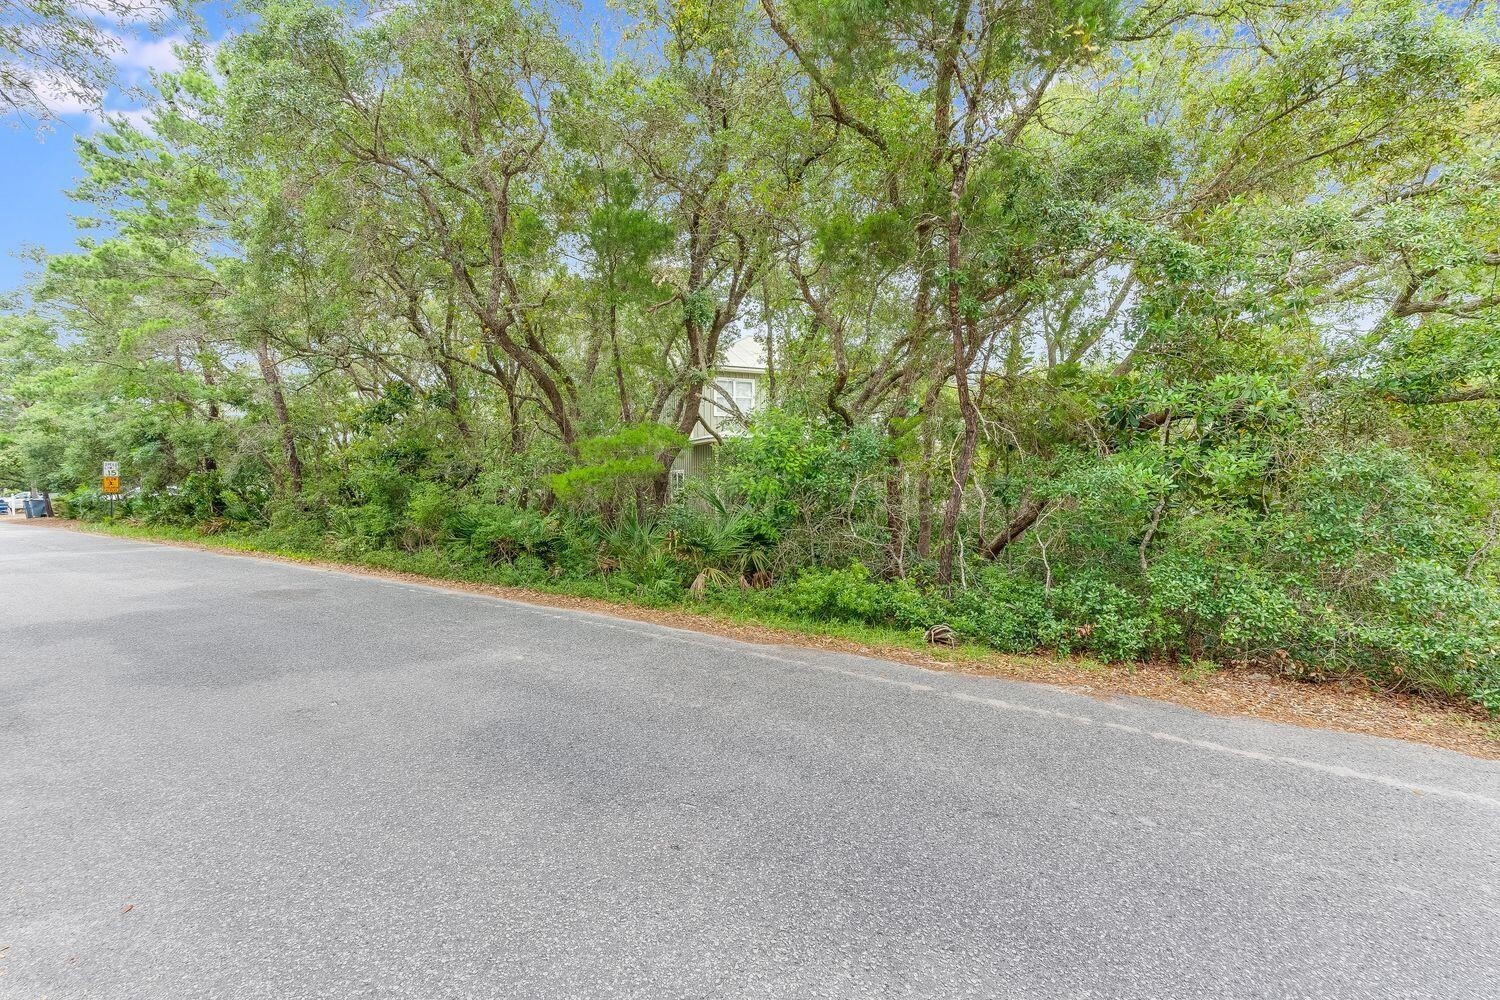 11. Lot13 Gulf Point Road